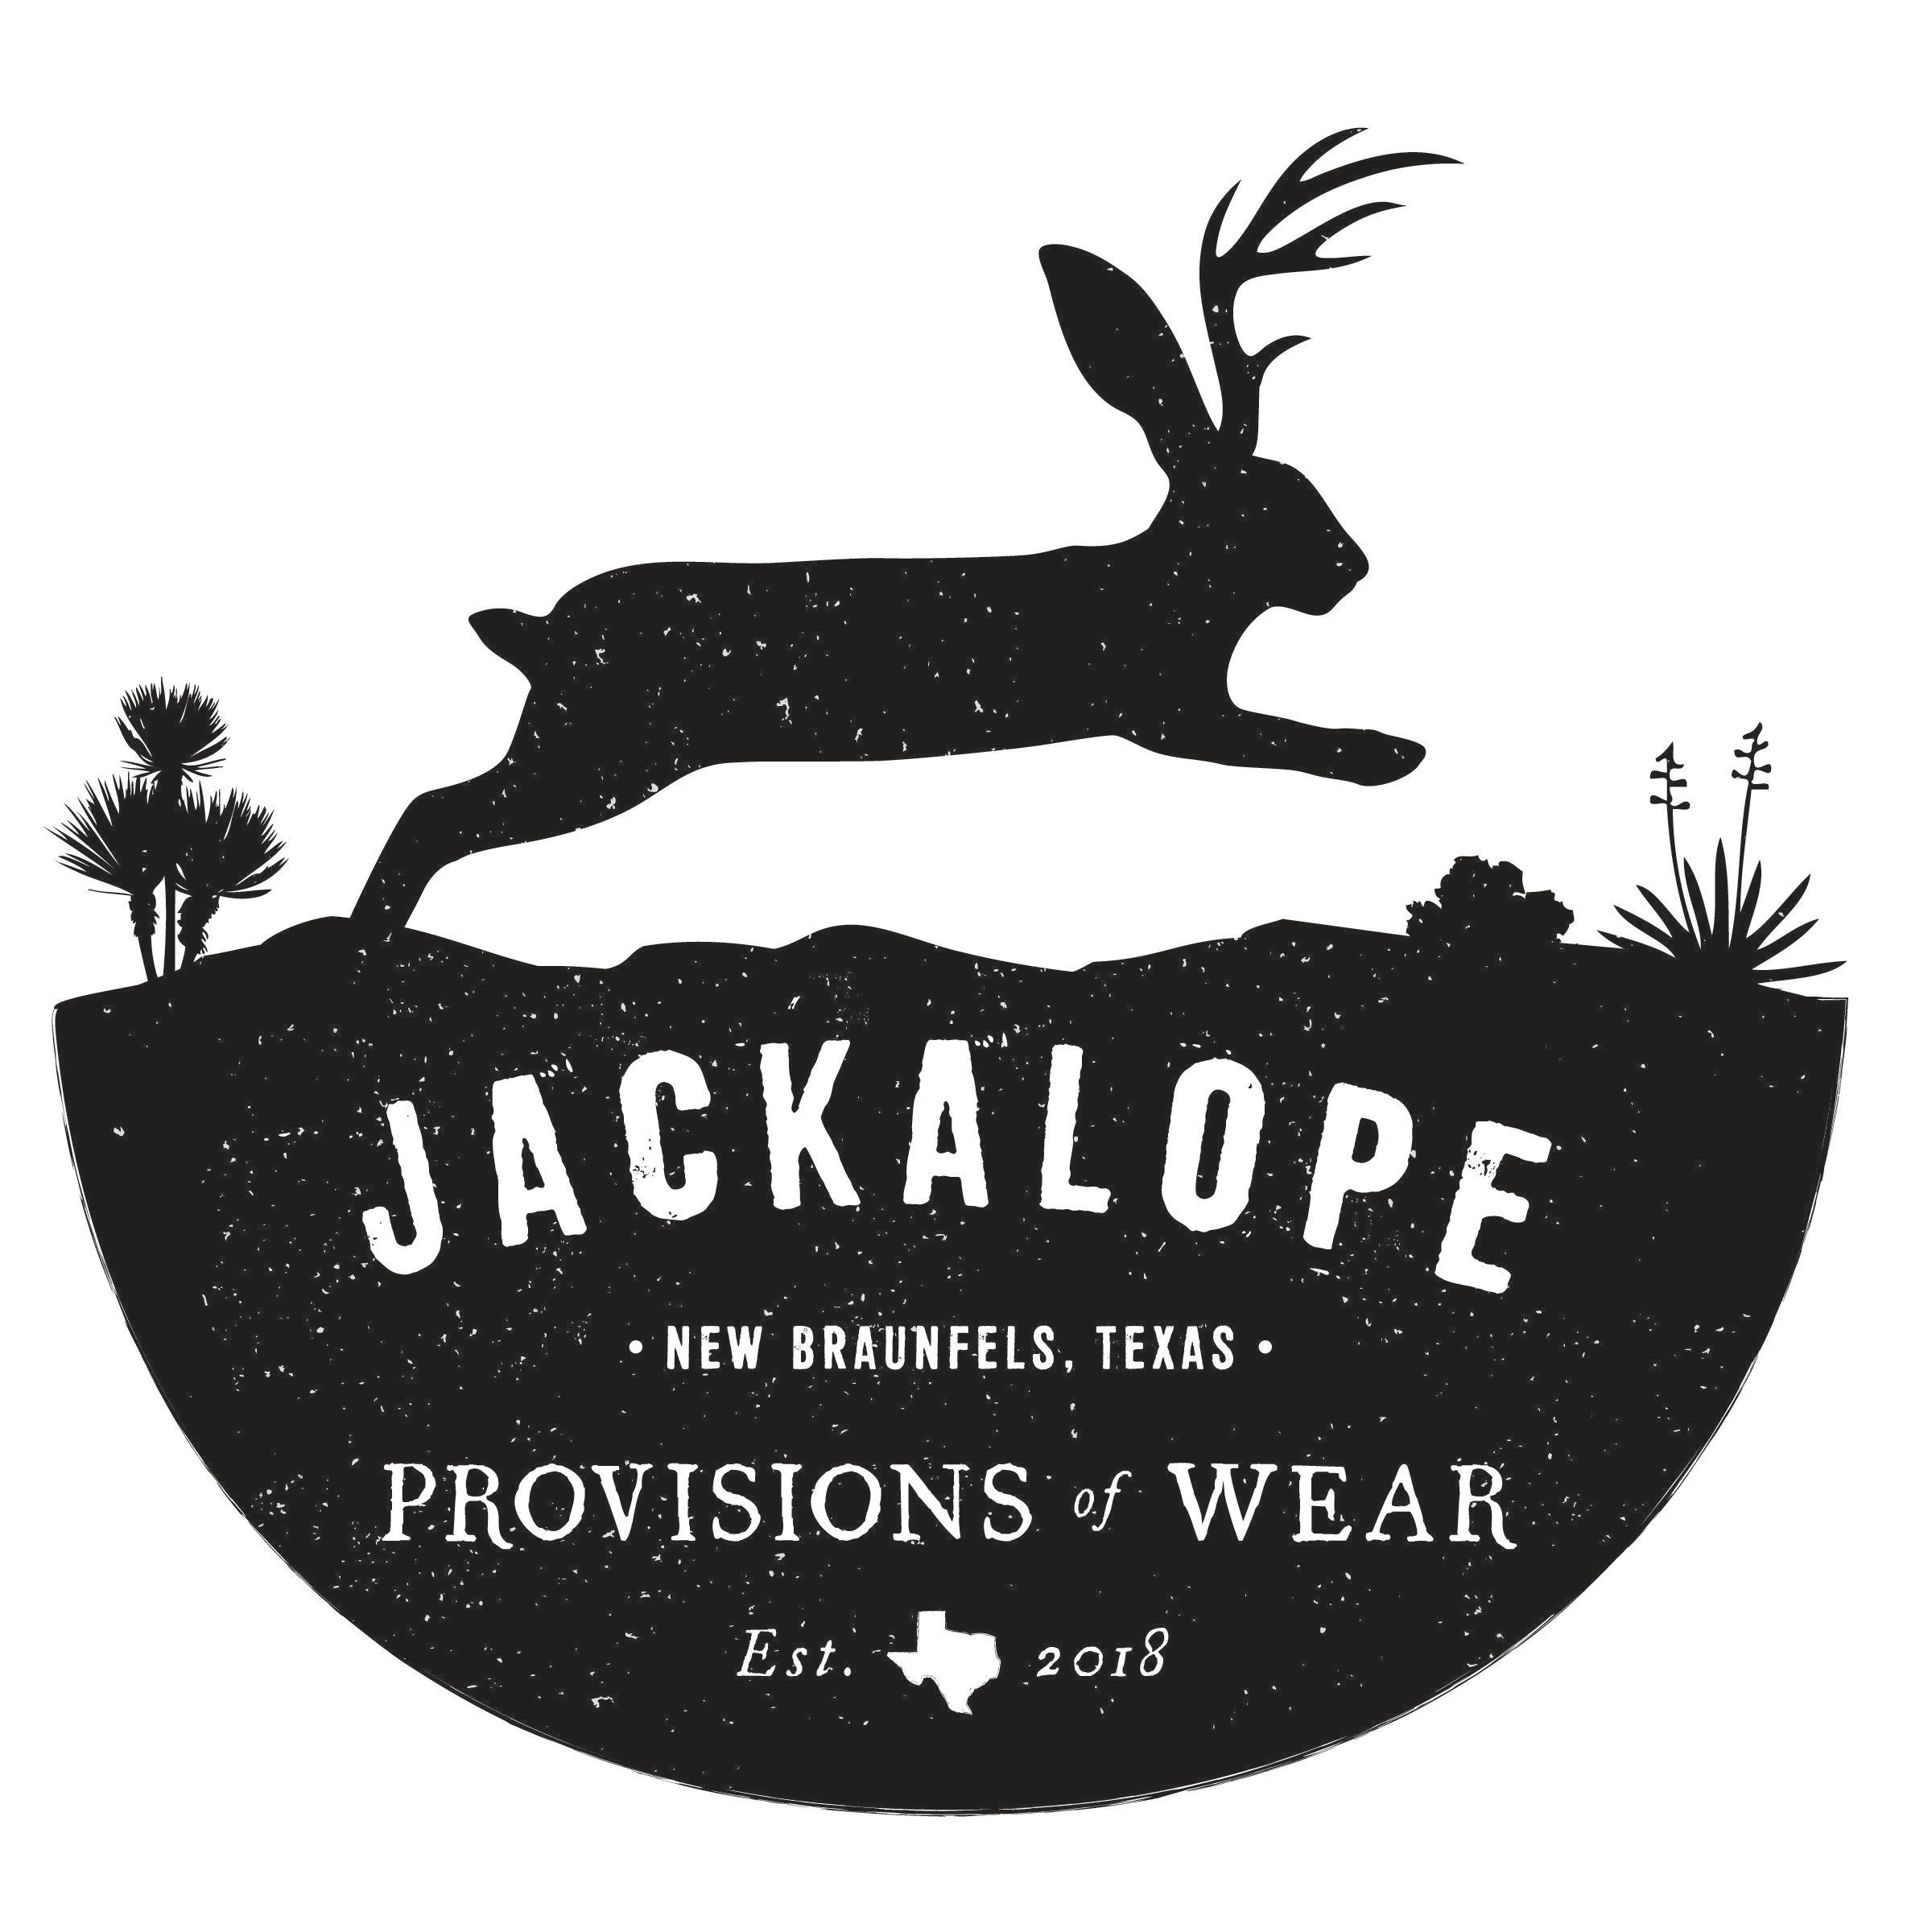 Jackalopes Silhouette Logo - Jackalope Provisions of Wear - New Braunfels Downtown